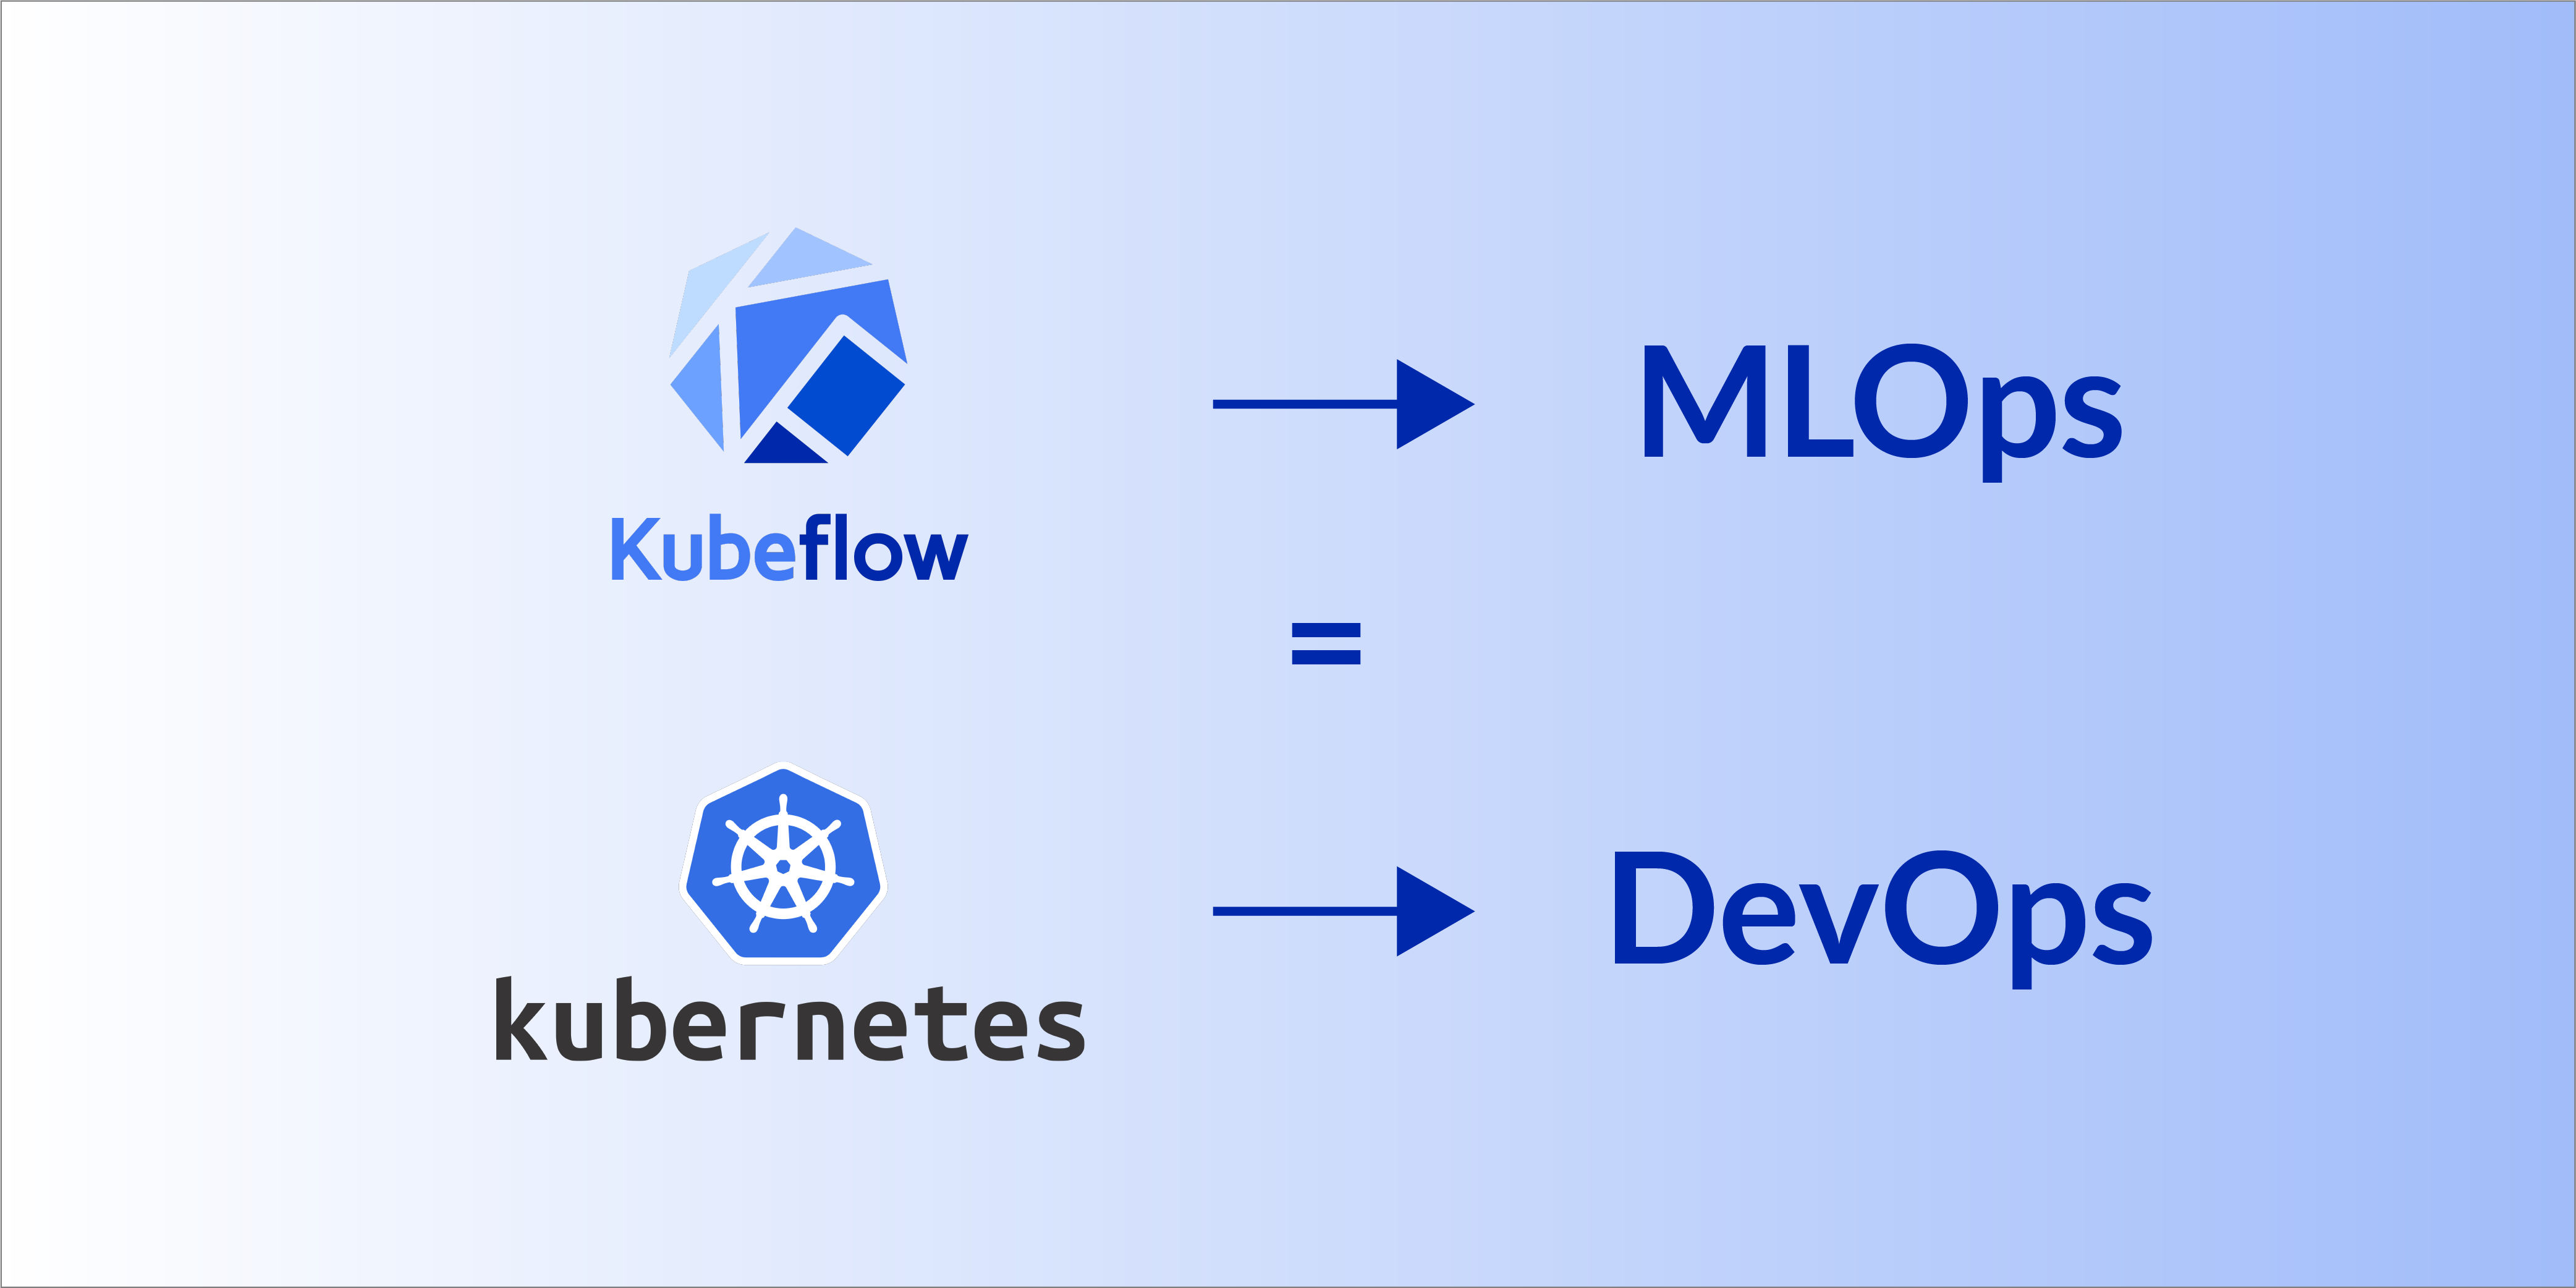 Image showing the Kubeflow logo pointing to MLOps and the Kubernetes logo pointing to DevOps and an equal sign between them.